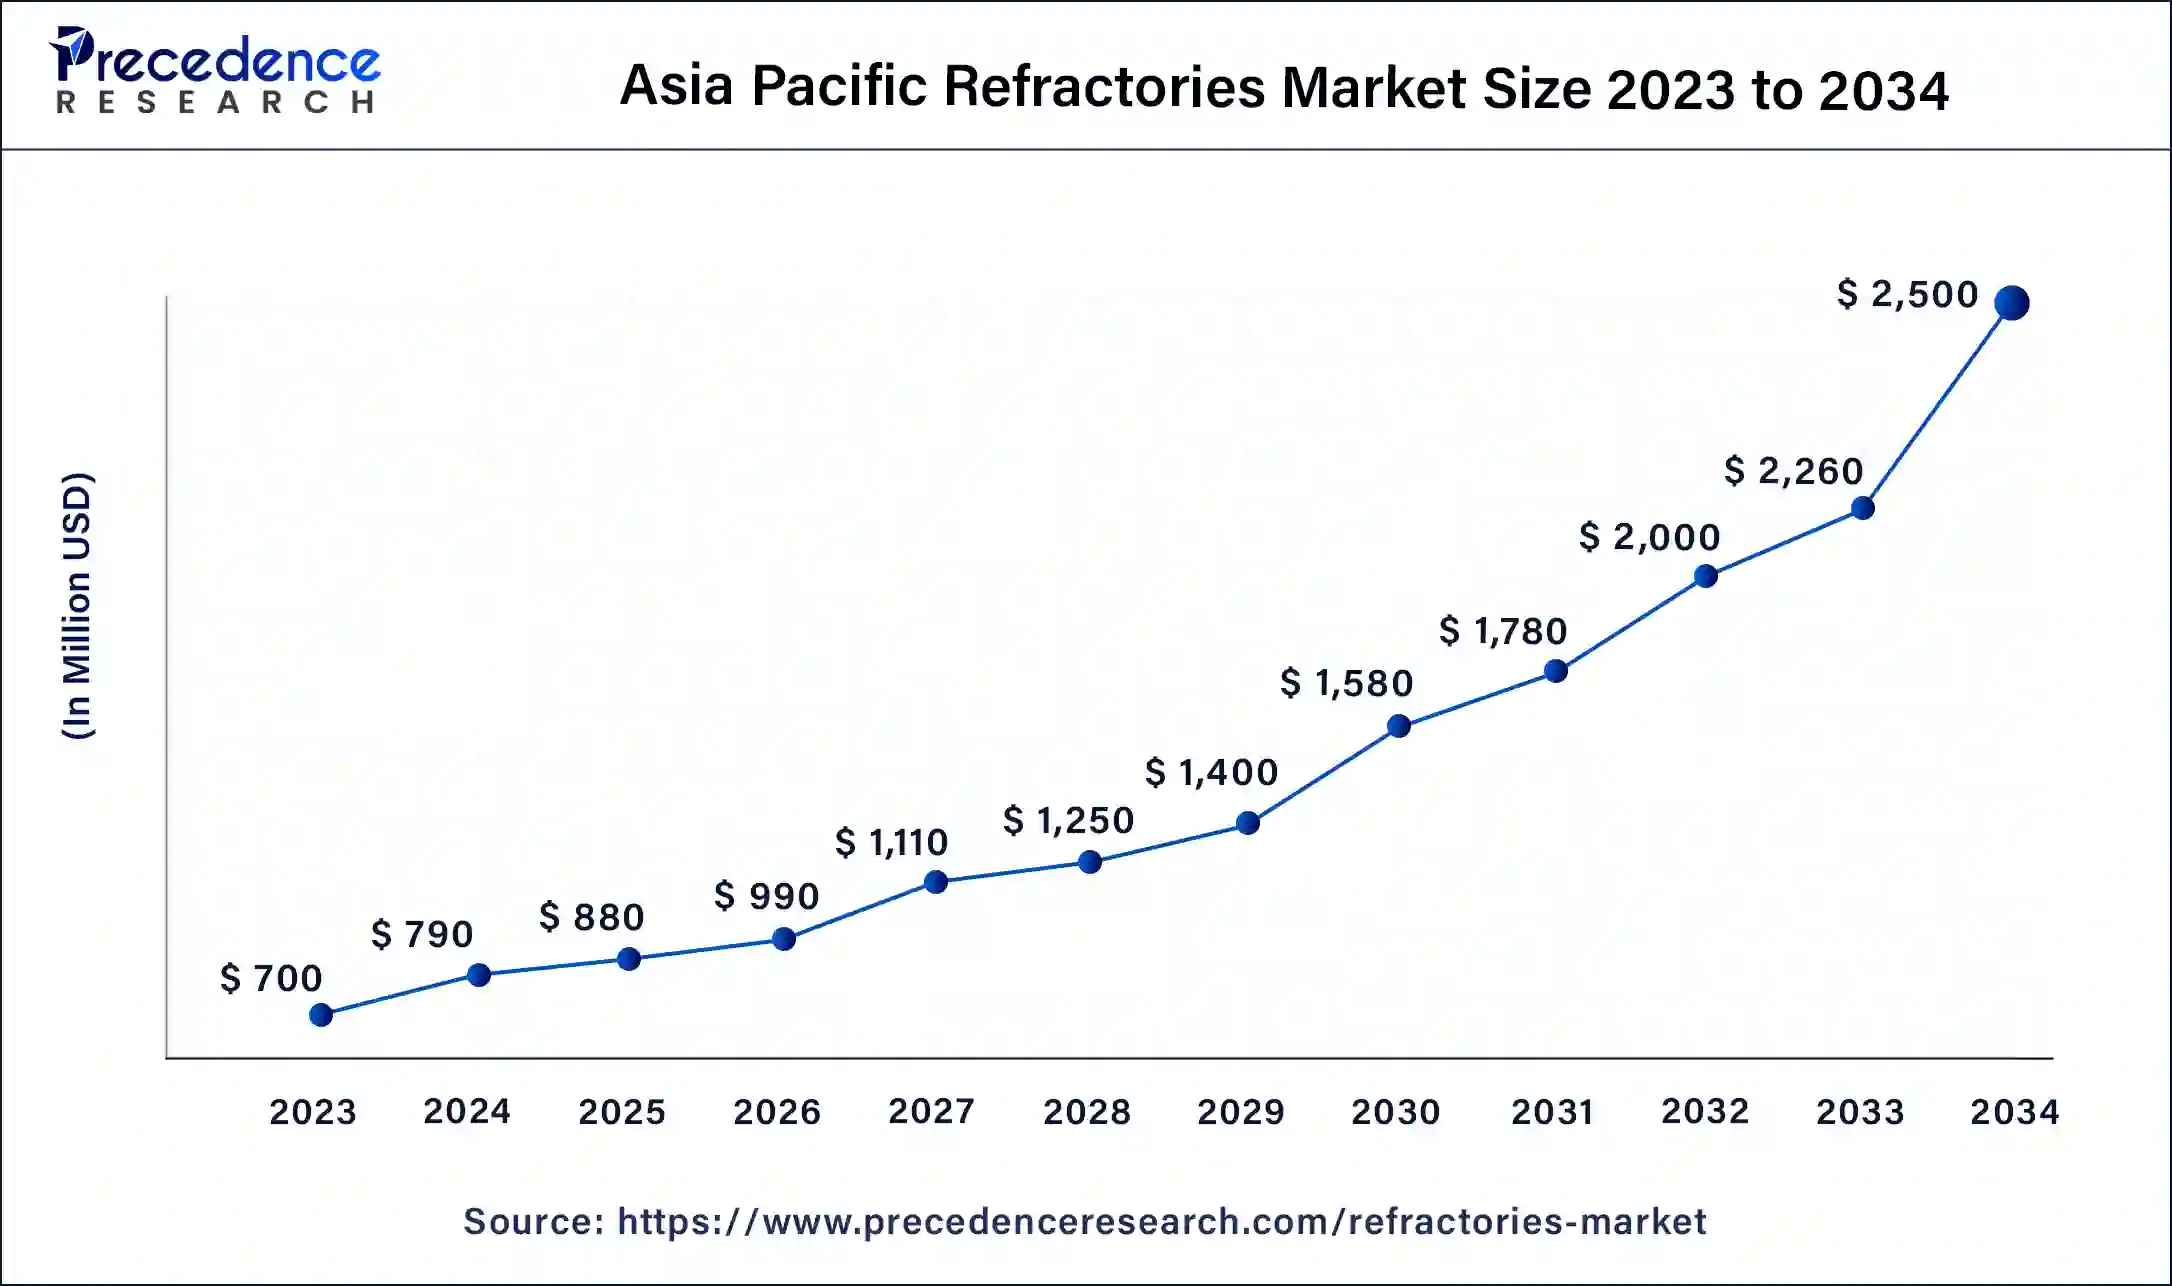 Asia Pacific Refractories Market Size 2024 To 2034